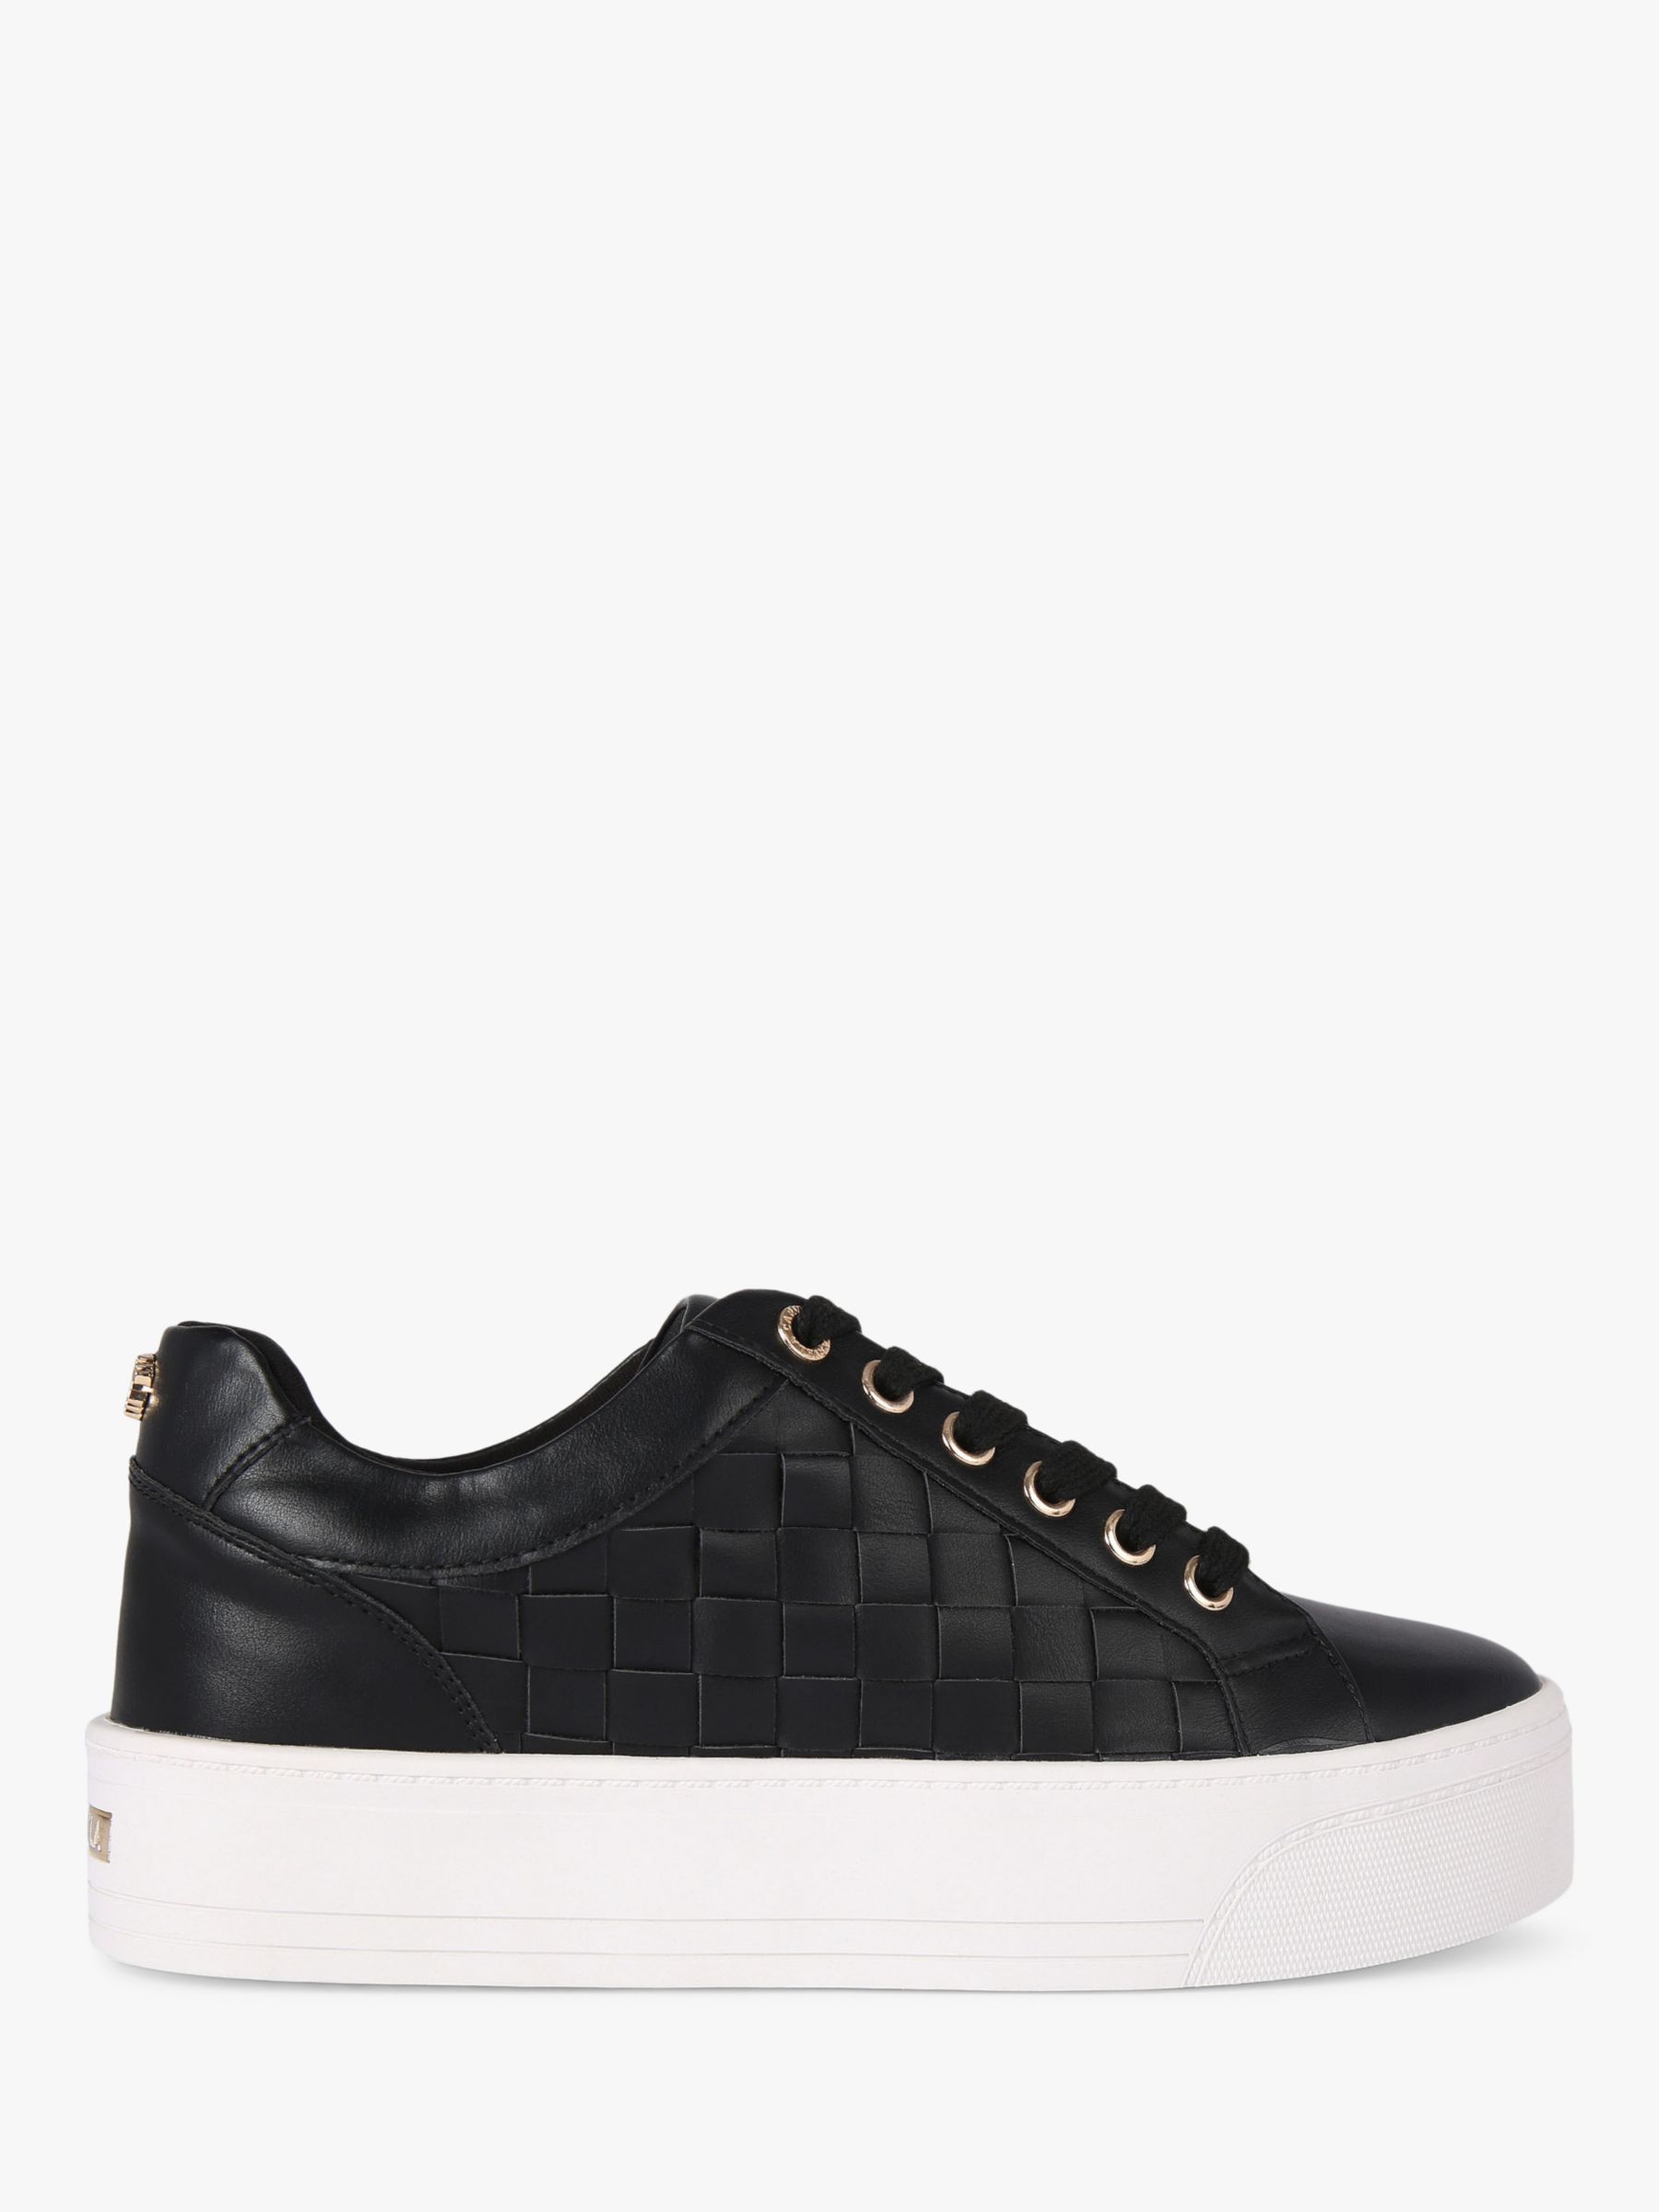 Carvela Checker Woven Trainers, Black at John Lewis & Partners